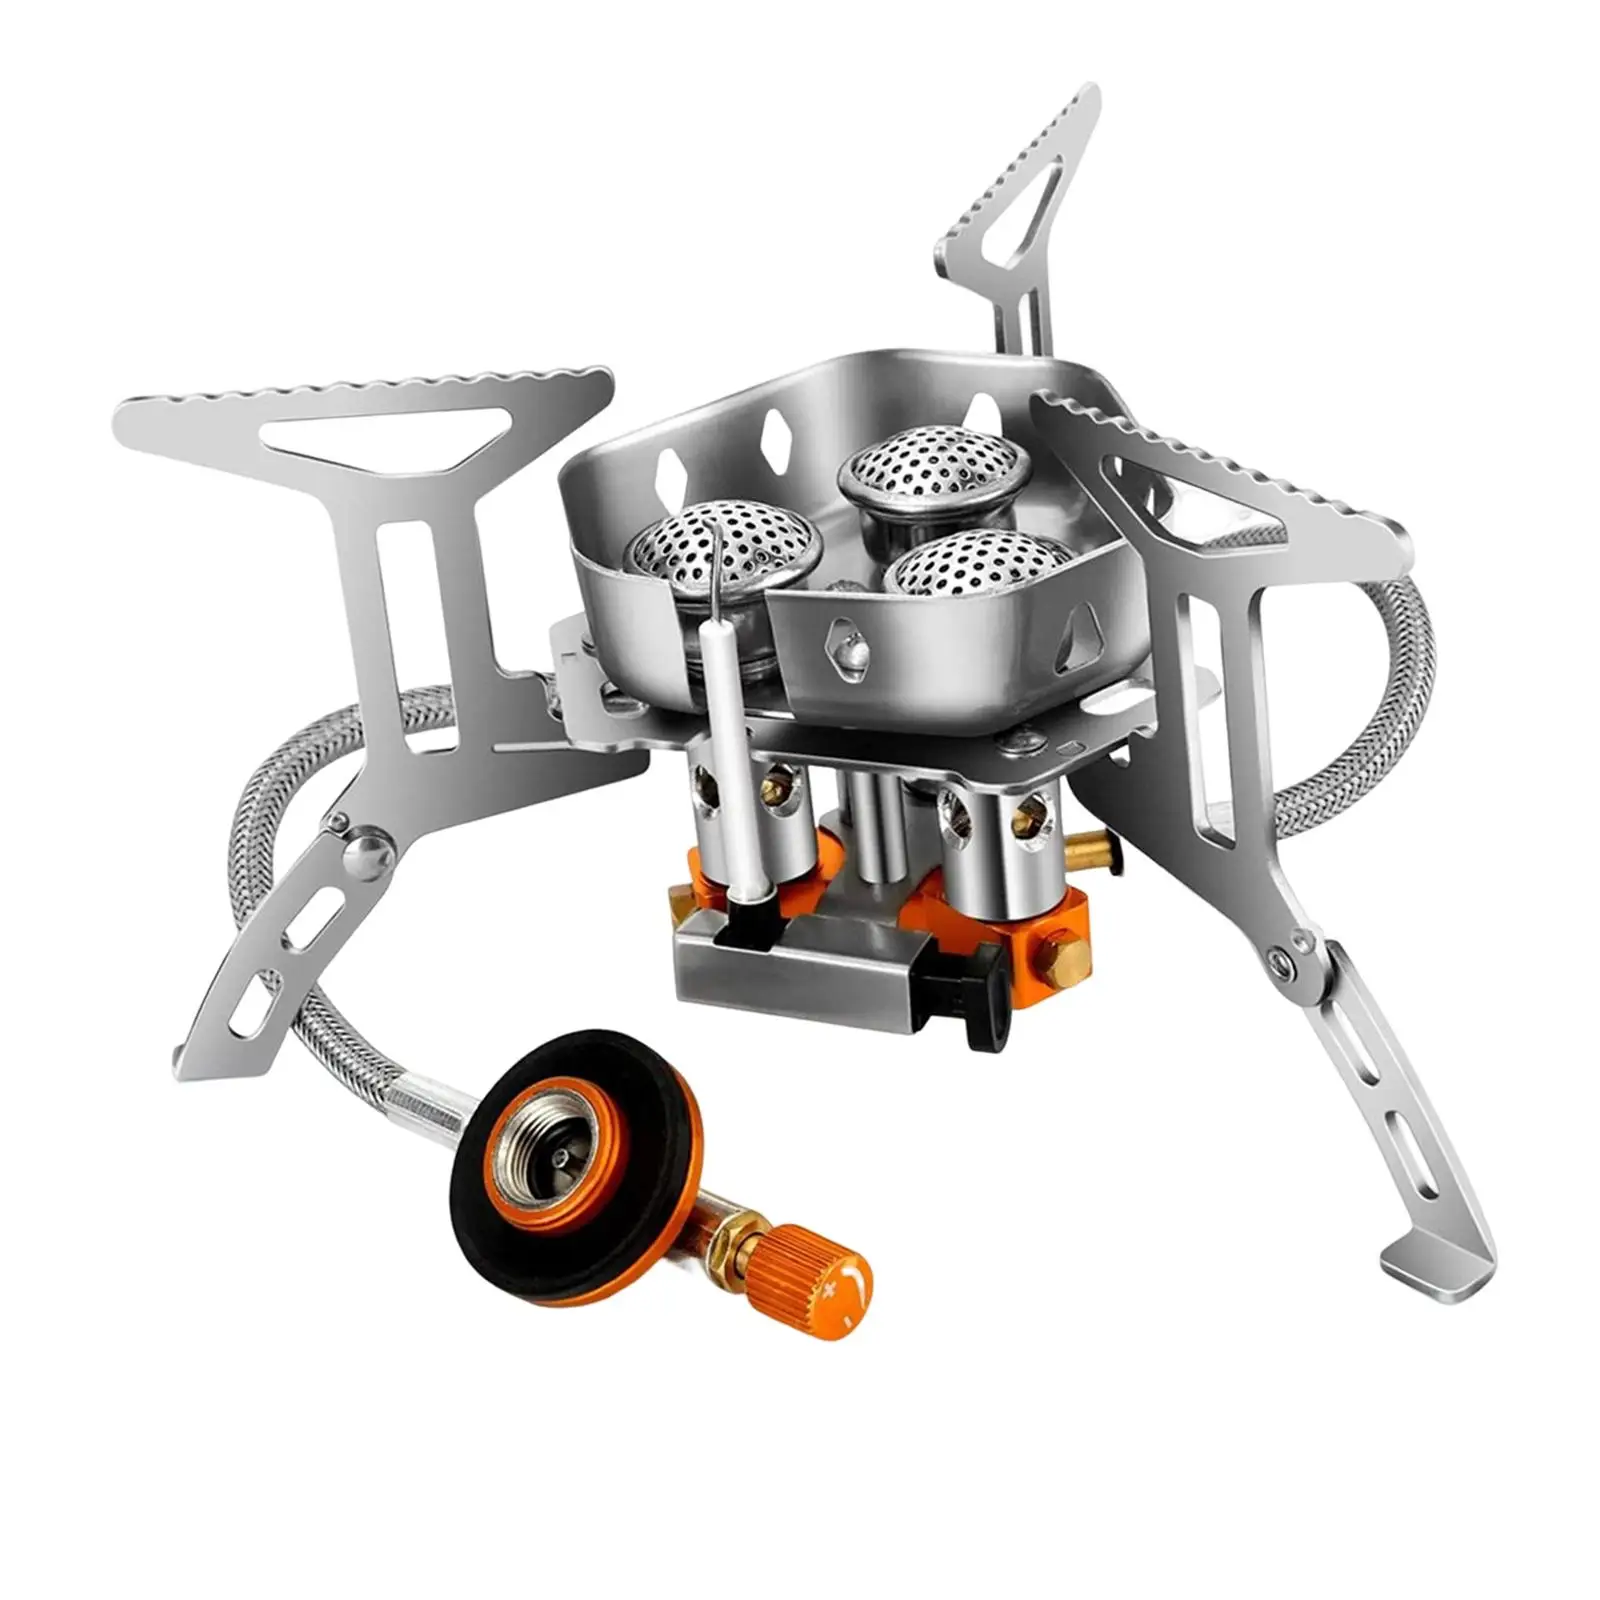 Portable Camping Gas Stove 3 Heads Mini Cookware with Adapter Windproof Lightweight Tool Mini for Travel Hiking Camping Fishing